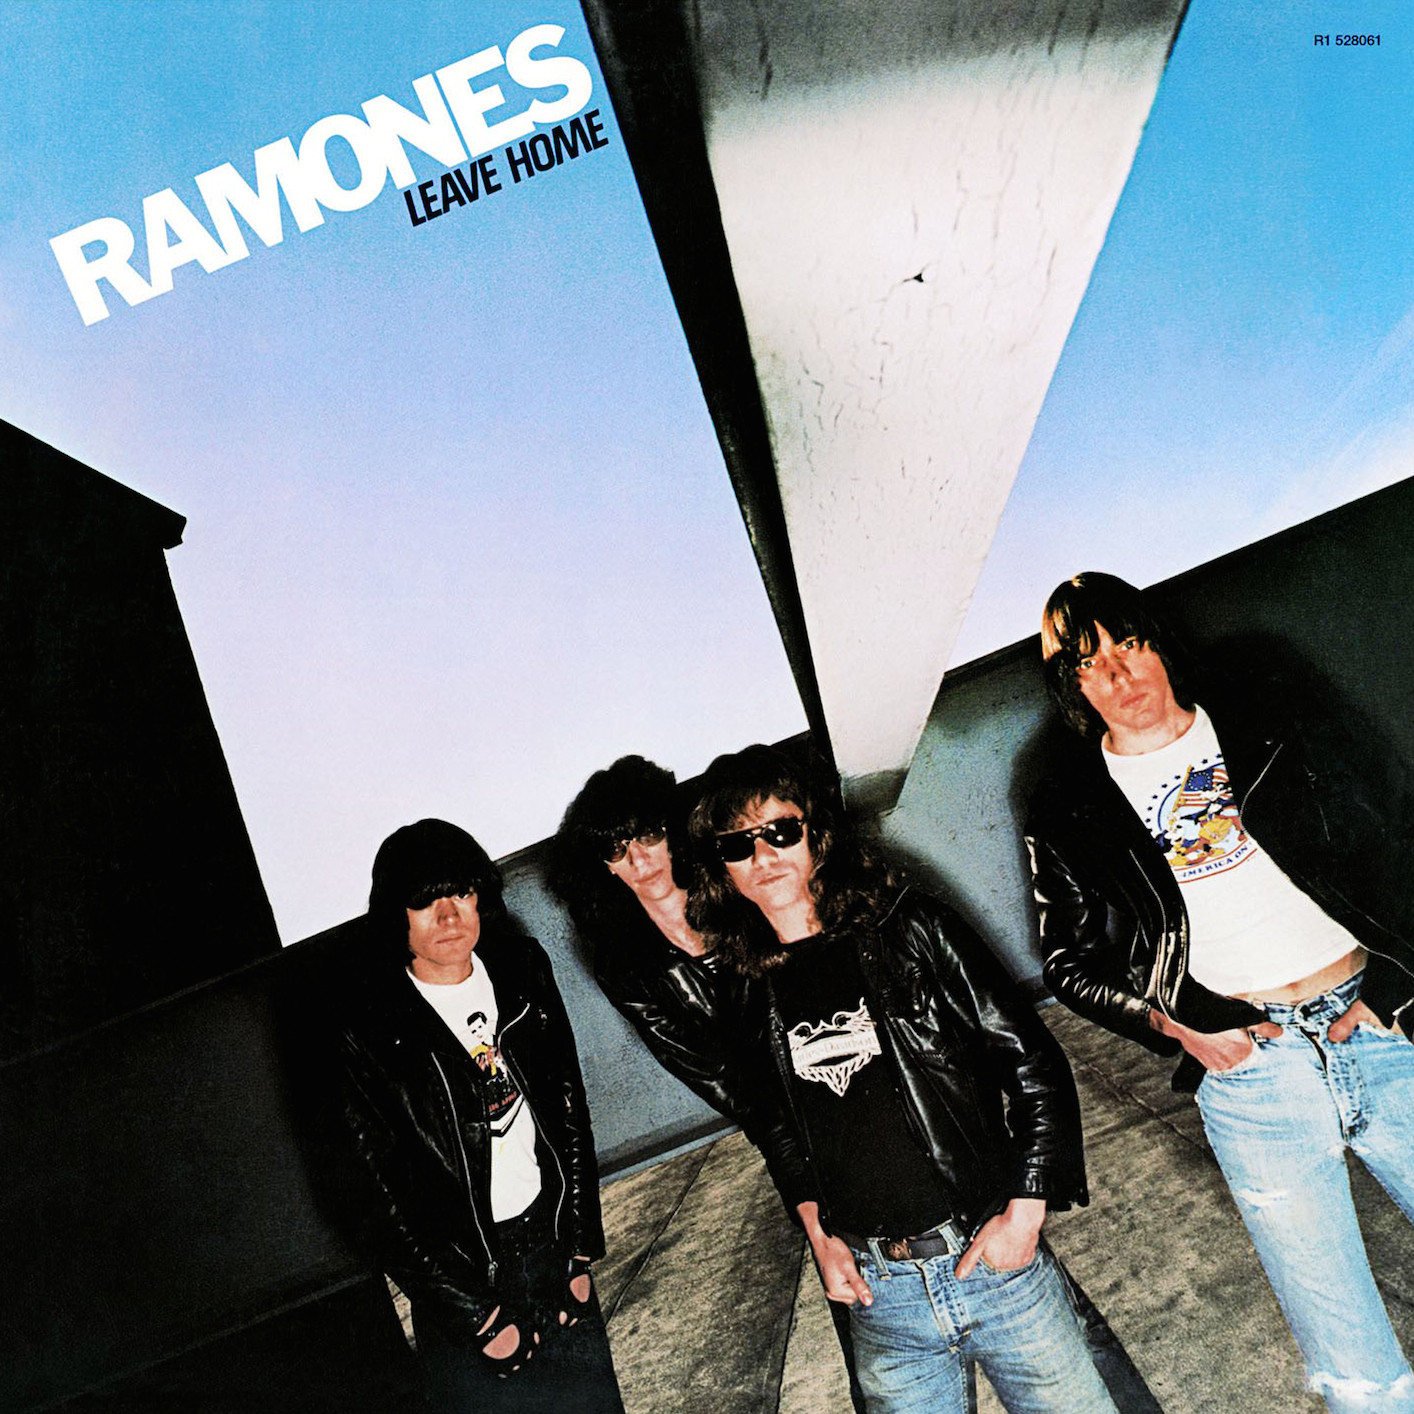 Ramones - Leave Home (40th Anniversary Deluxe Edition) (1977/2017) [FLAC 24bit/96kHz]